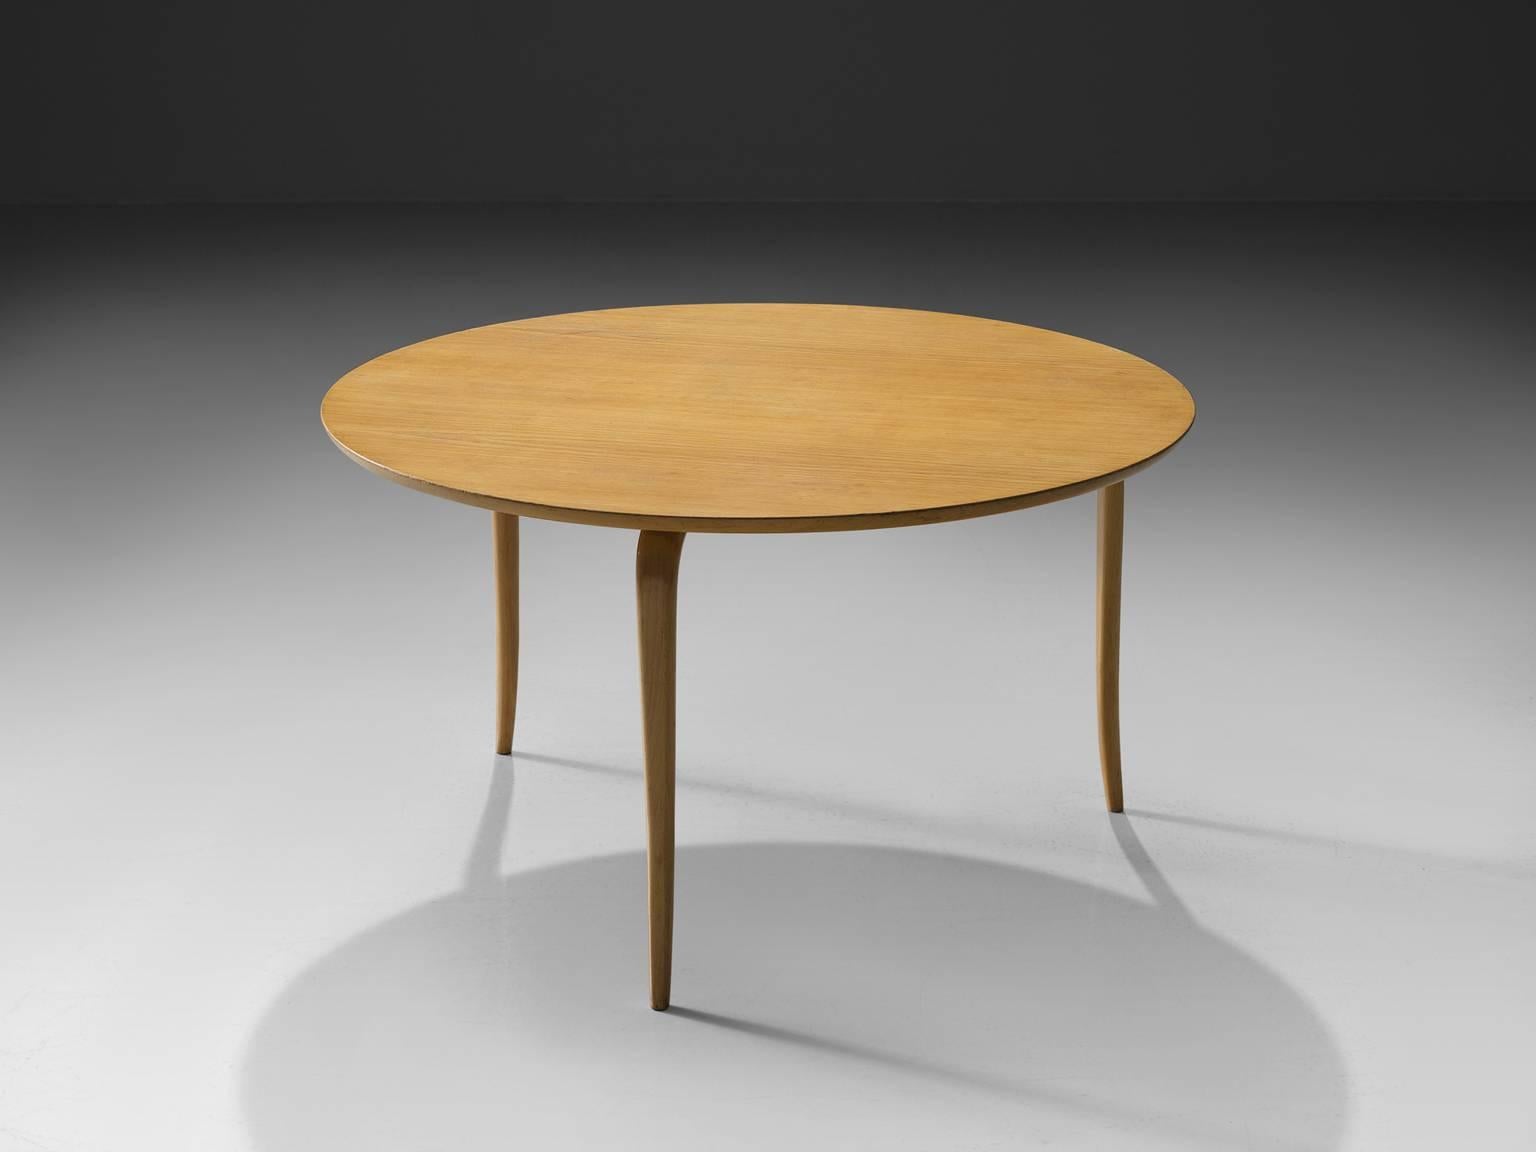 Bruno Mathsson for Karl Mathsson, Annika table, birch, Sweden, 1950s.

This so called Annika coffee table has birch bent plywood legs, which are fluently curved and tapered. These light legs are elegant and give this piece its unique appearance. The